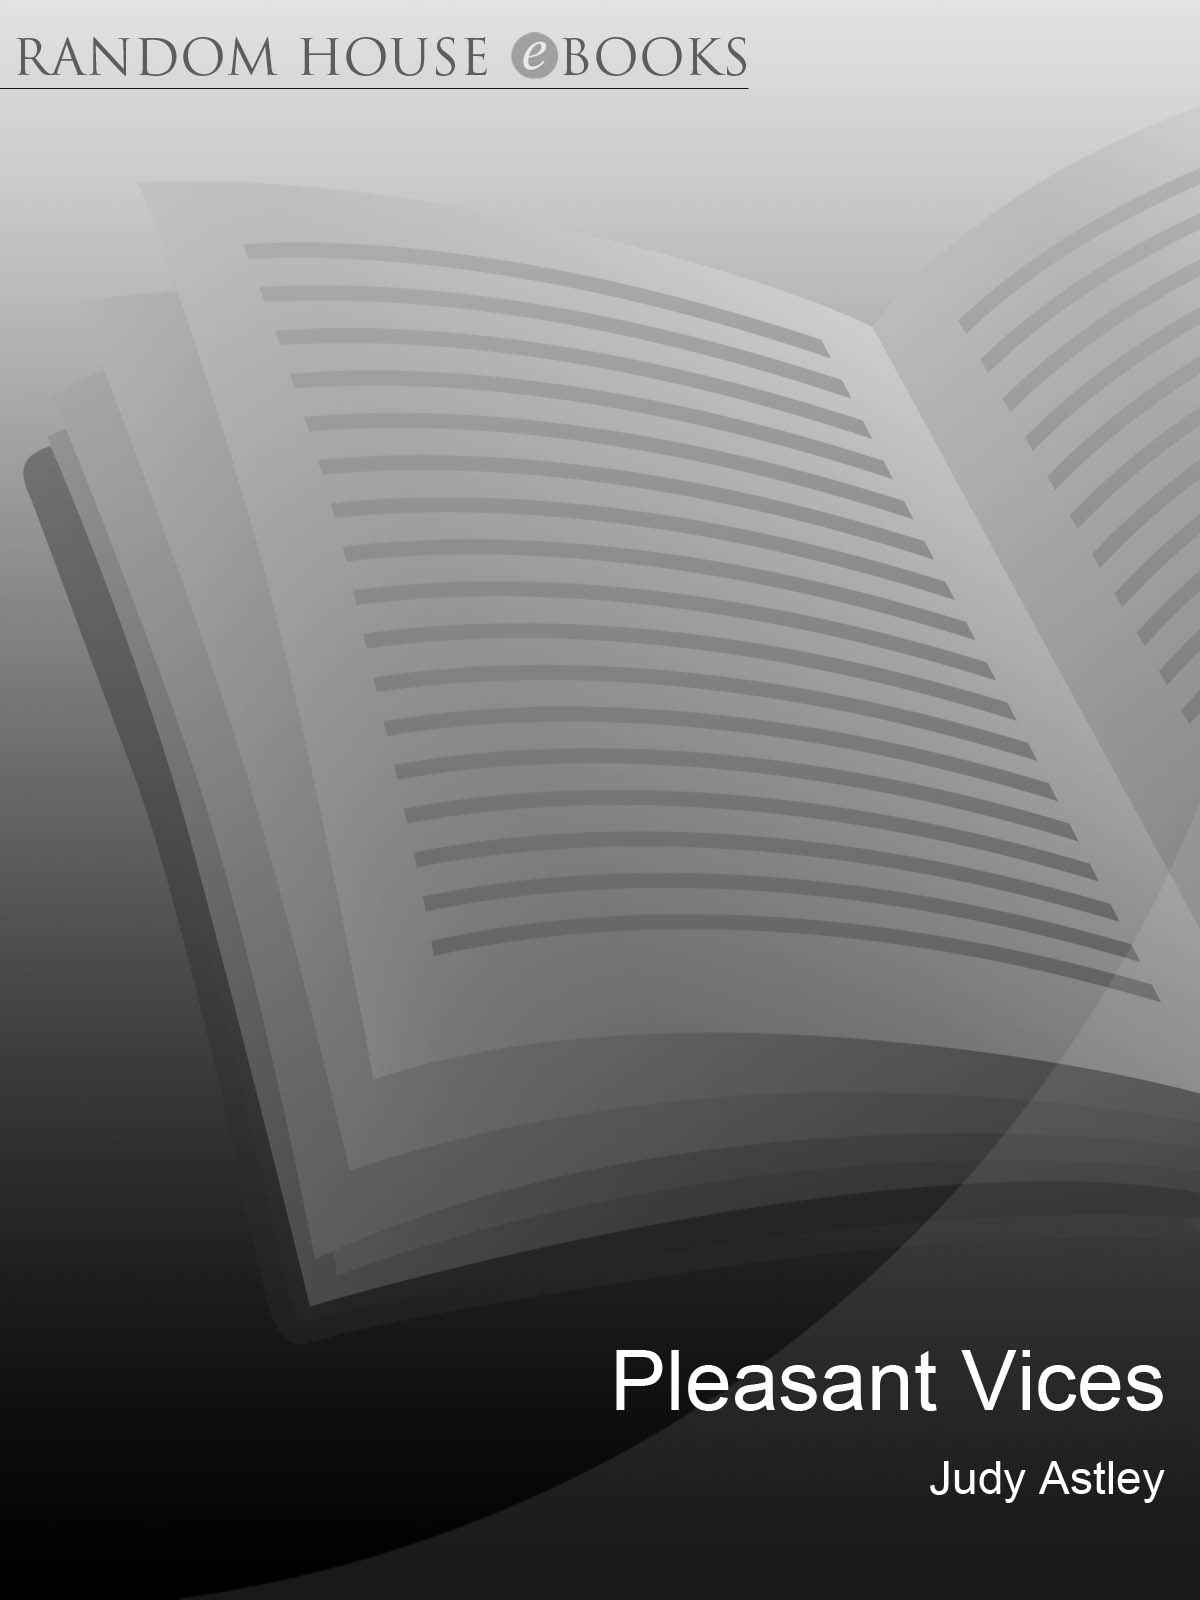 Pleasant Vices (1995) by Judy Astley